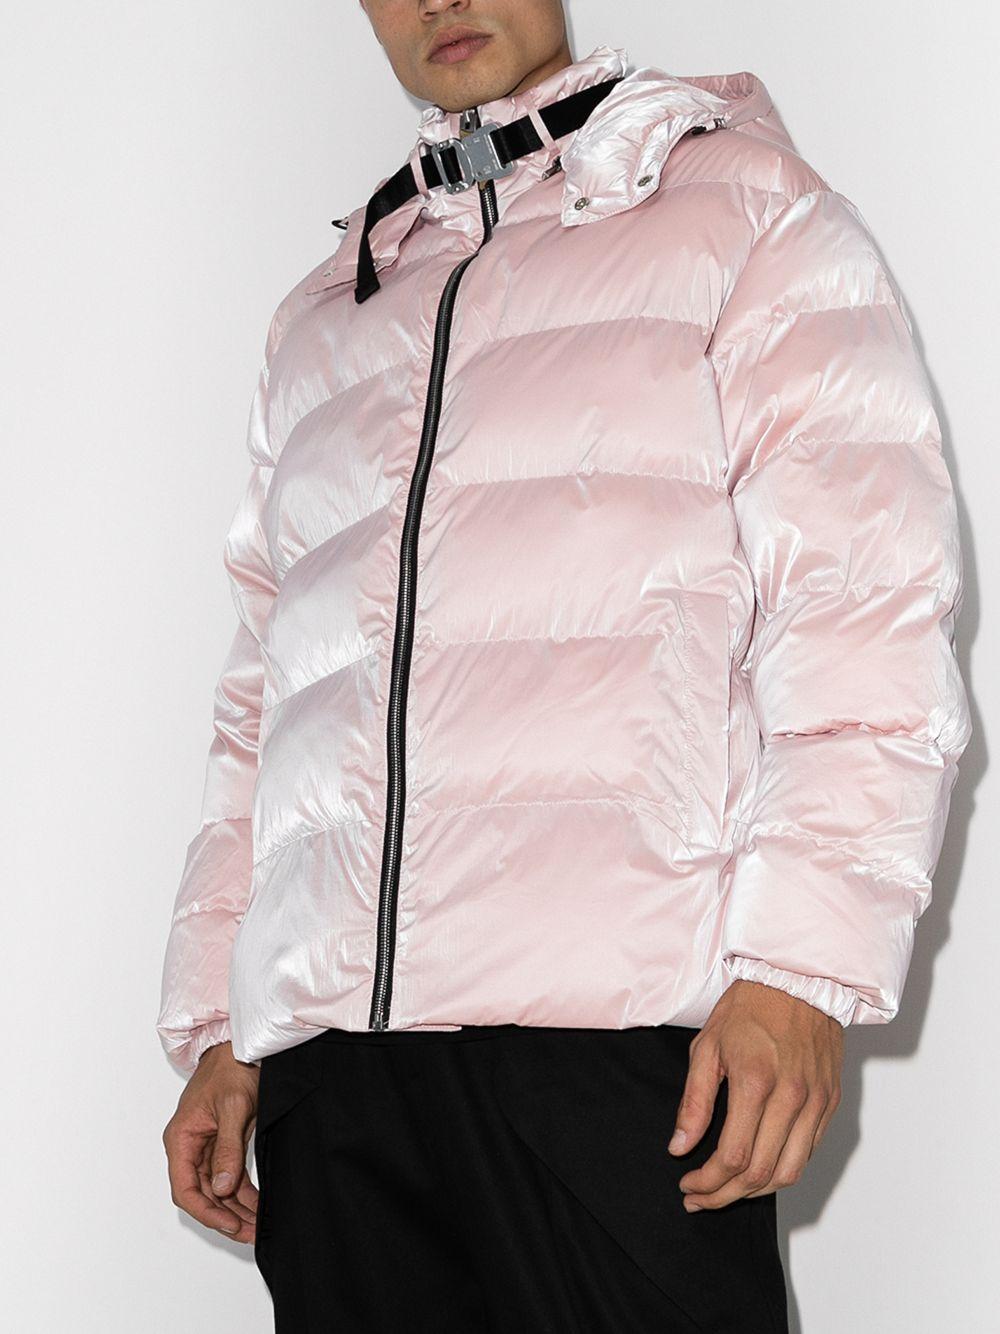 1017 ALYX 9SM Synthetic Nightrider Padded Jacket in Pink for Men - Lyst